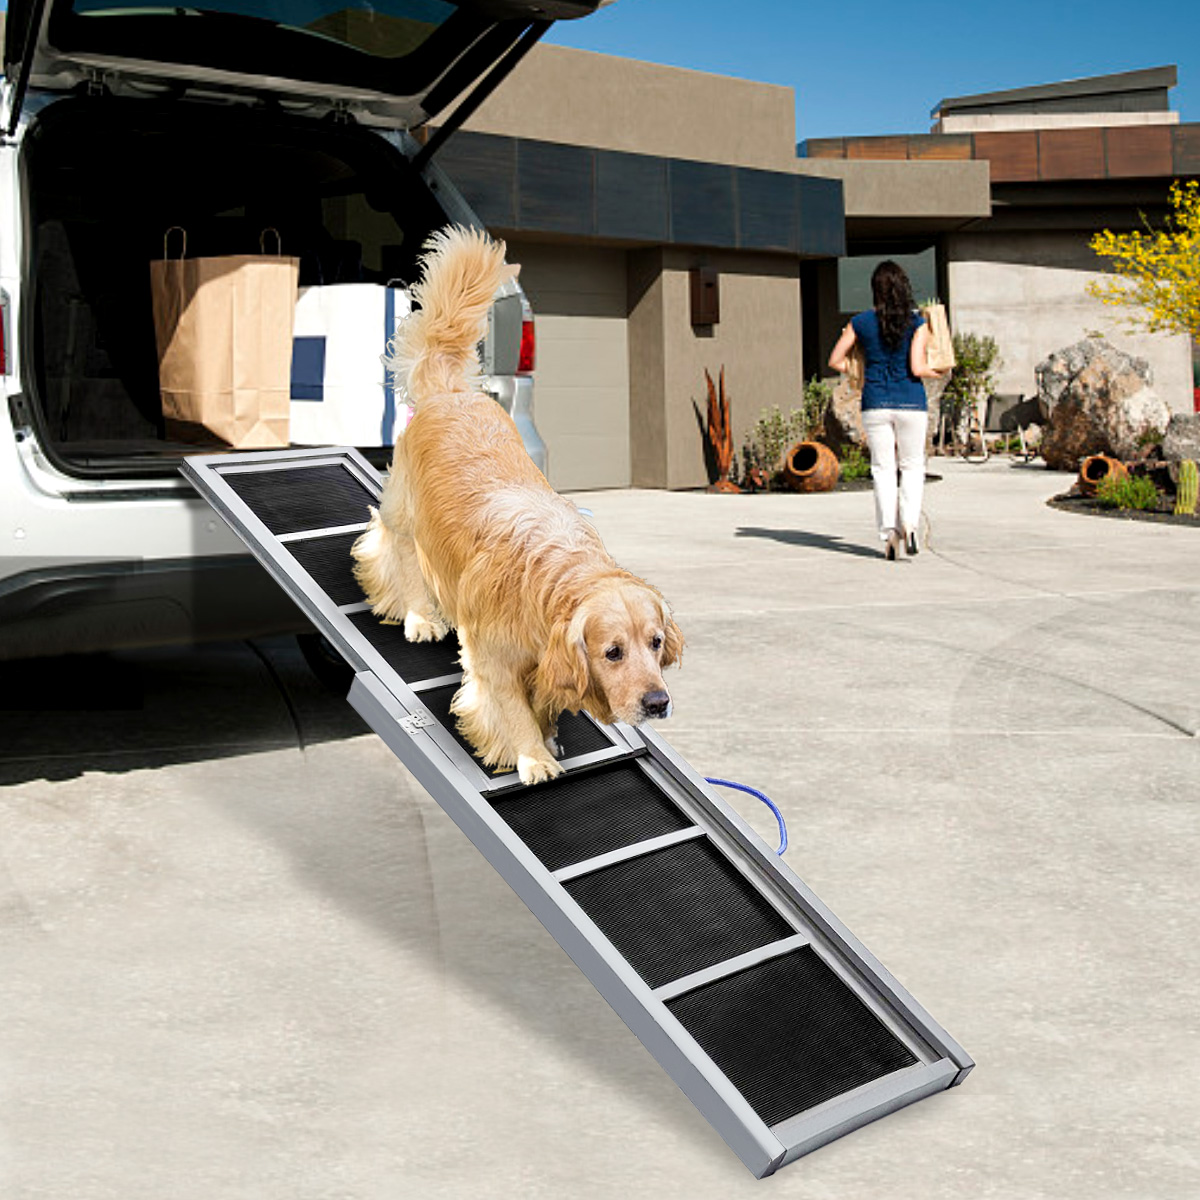 Dog-Ramps-Telescoping-Non-Slip-Stable-Wooden-Extension-Pet-Ladder-for-Steep-Inclines-Compact-Portabl-1599642